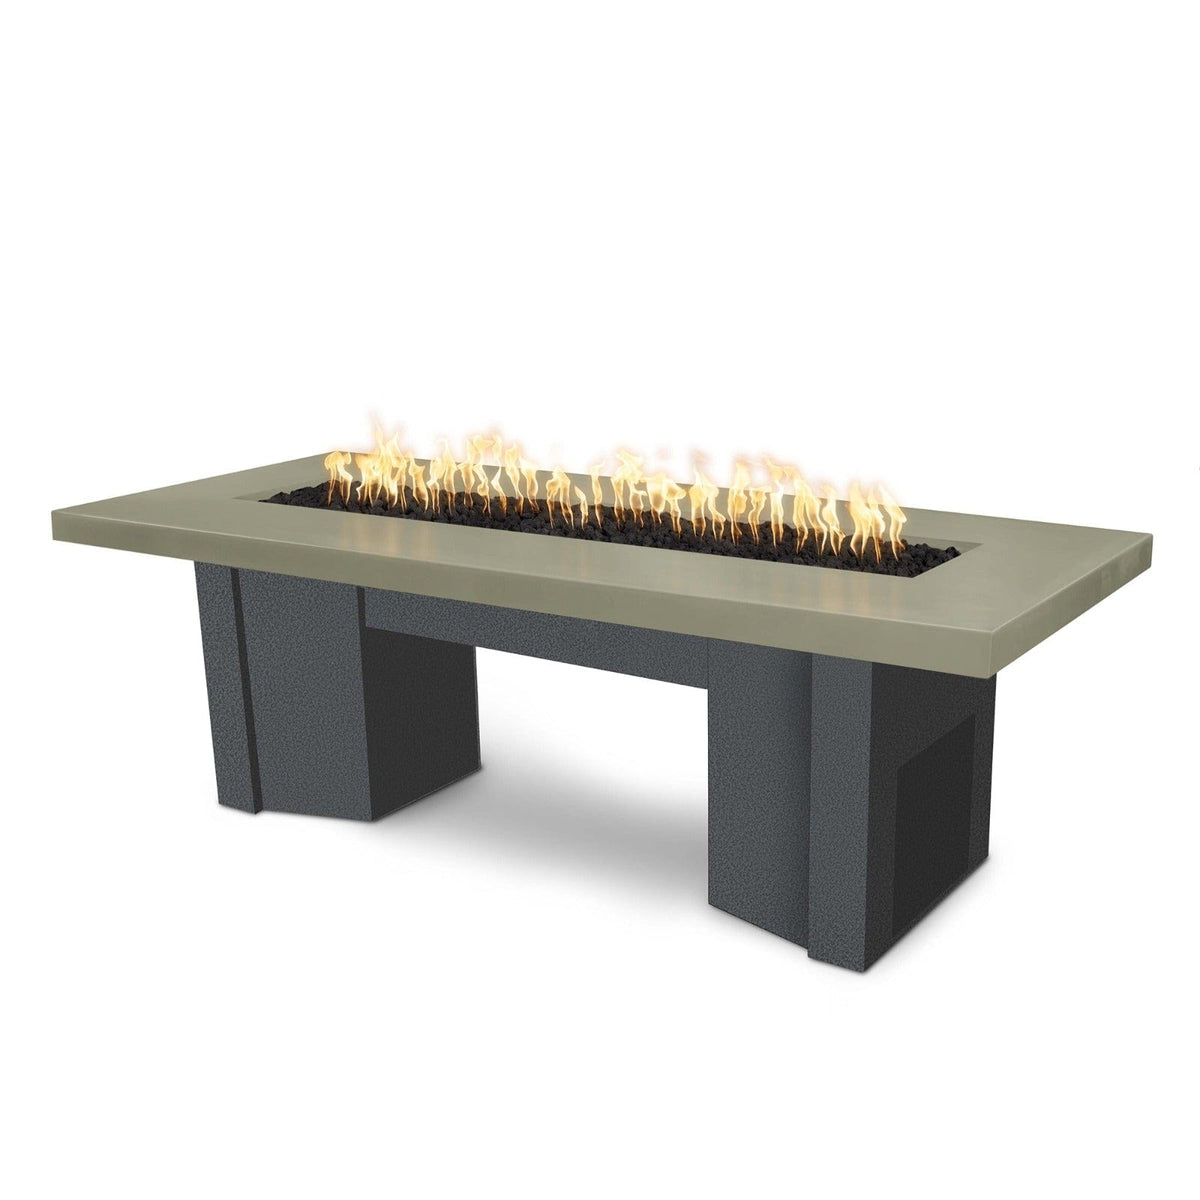 The Outdoor Plus Fire Features Ash (-ASH) / Silver Vein Powder Coated Steel (-SLV) The Outdoor Plus 78&quot; Alameda Fire Table Smooth Concrete in Natural Gas - Flame Sense System with Push Button Spark Igniter / OPT-ALMGFRC78FSEN-NG